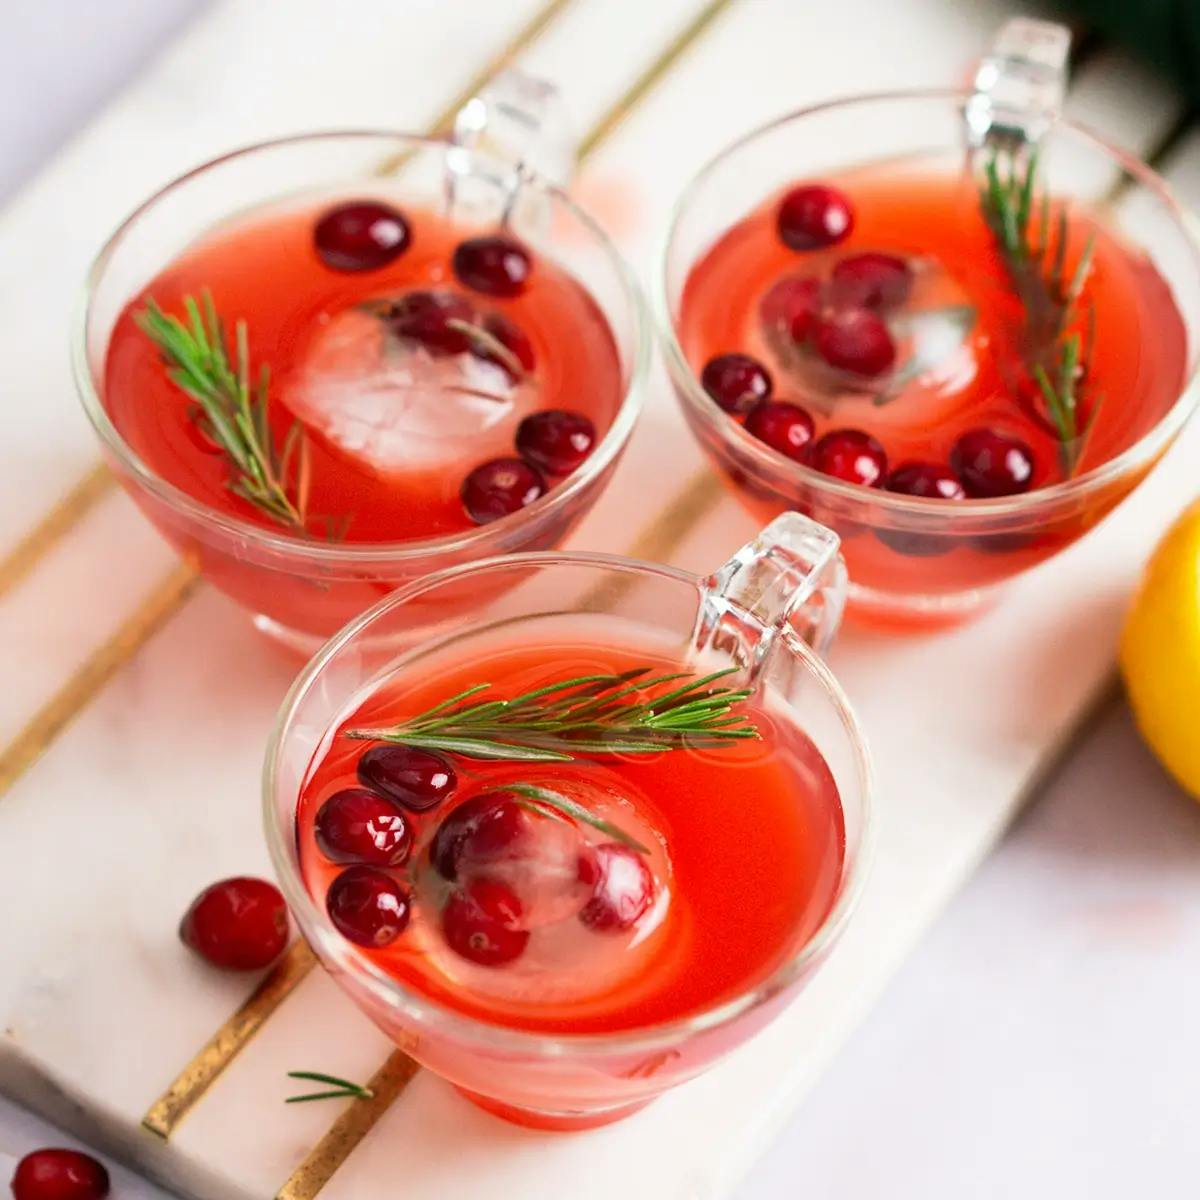 Three glasses of Christmas Punch on a cutting board next to half a lemon and a bowl of cranberries.